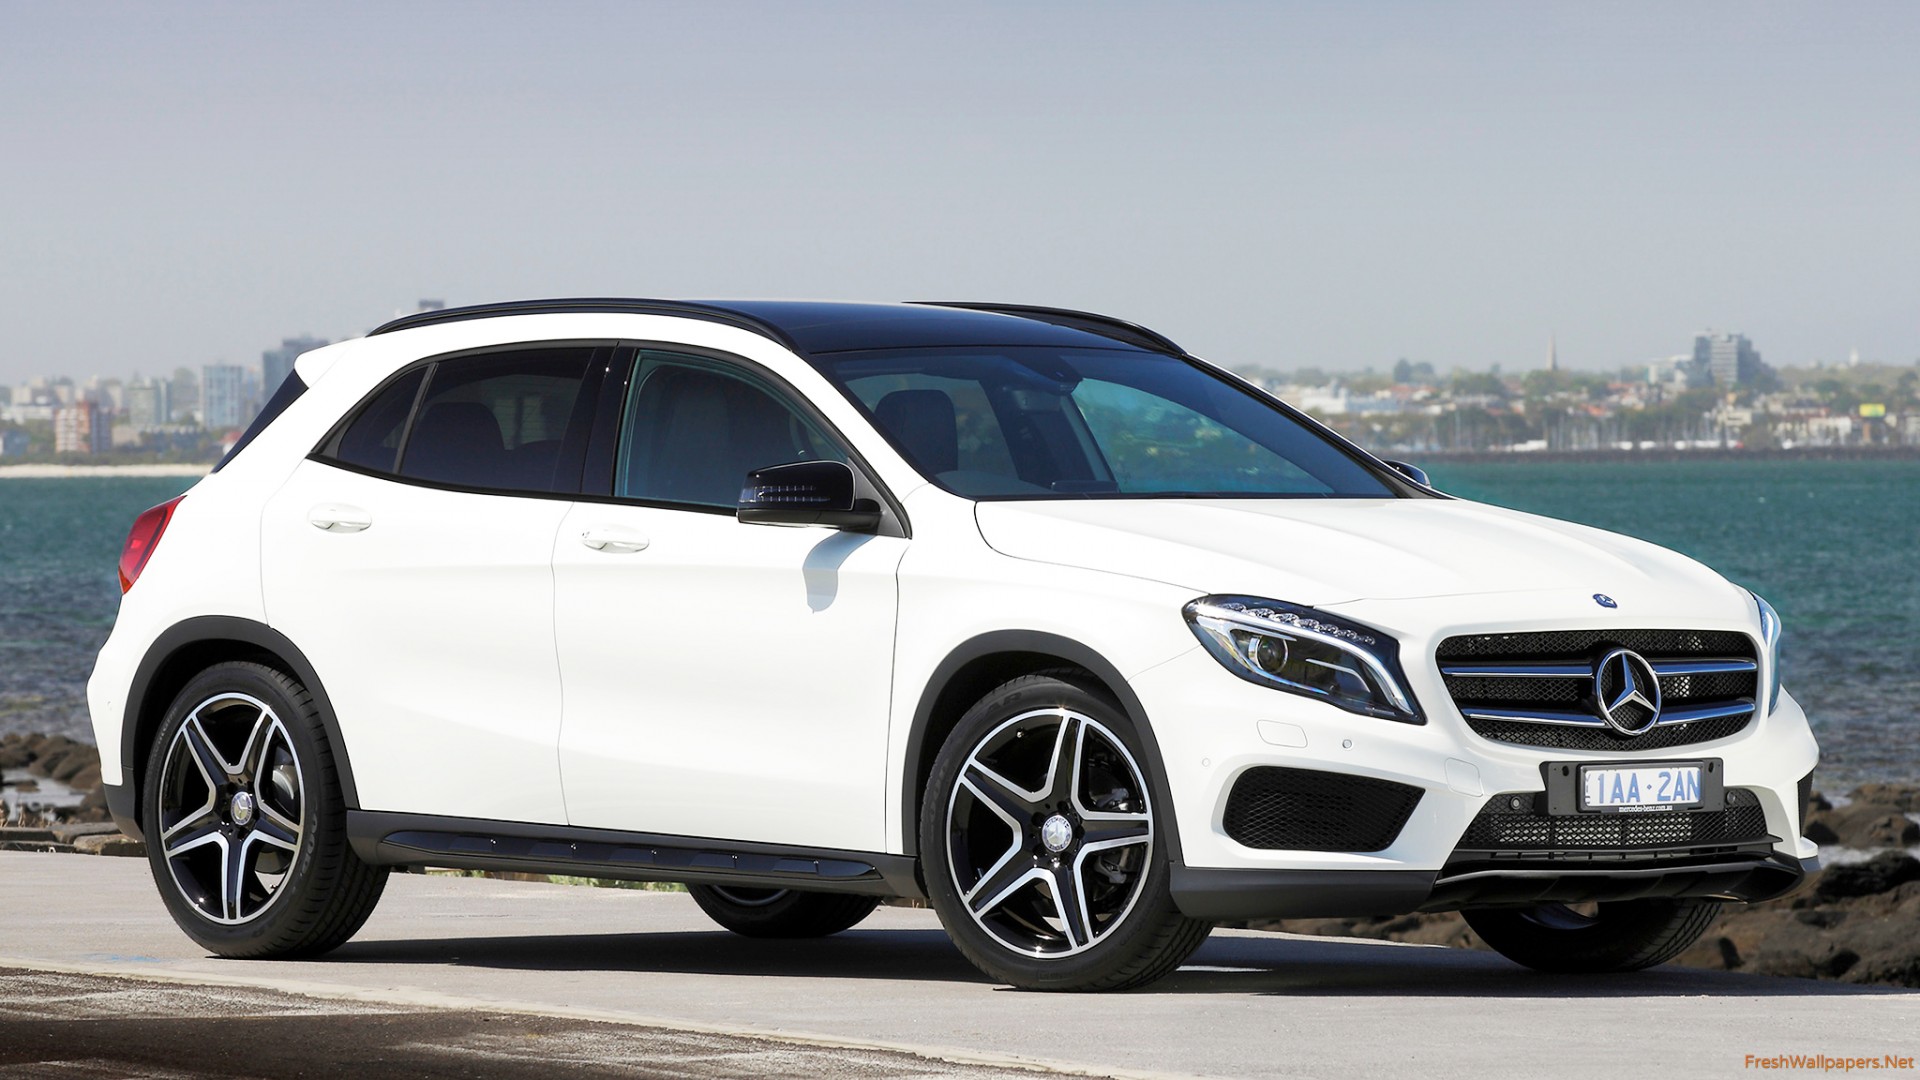 mercedes gla 200 amg wallpapers | Freshwallpapers